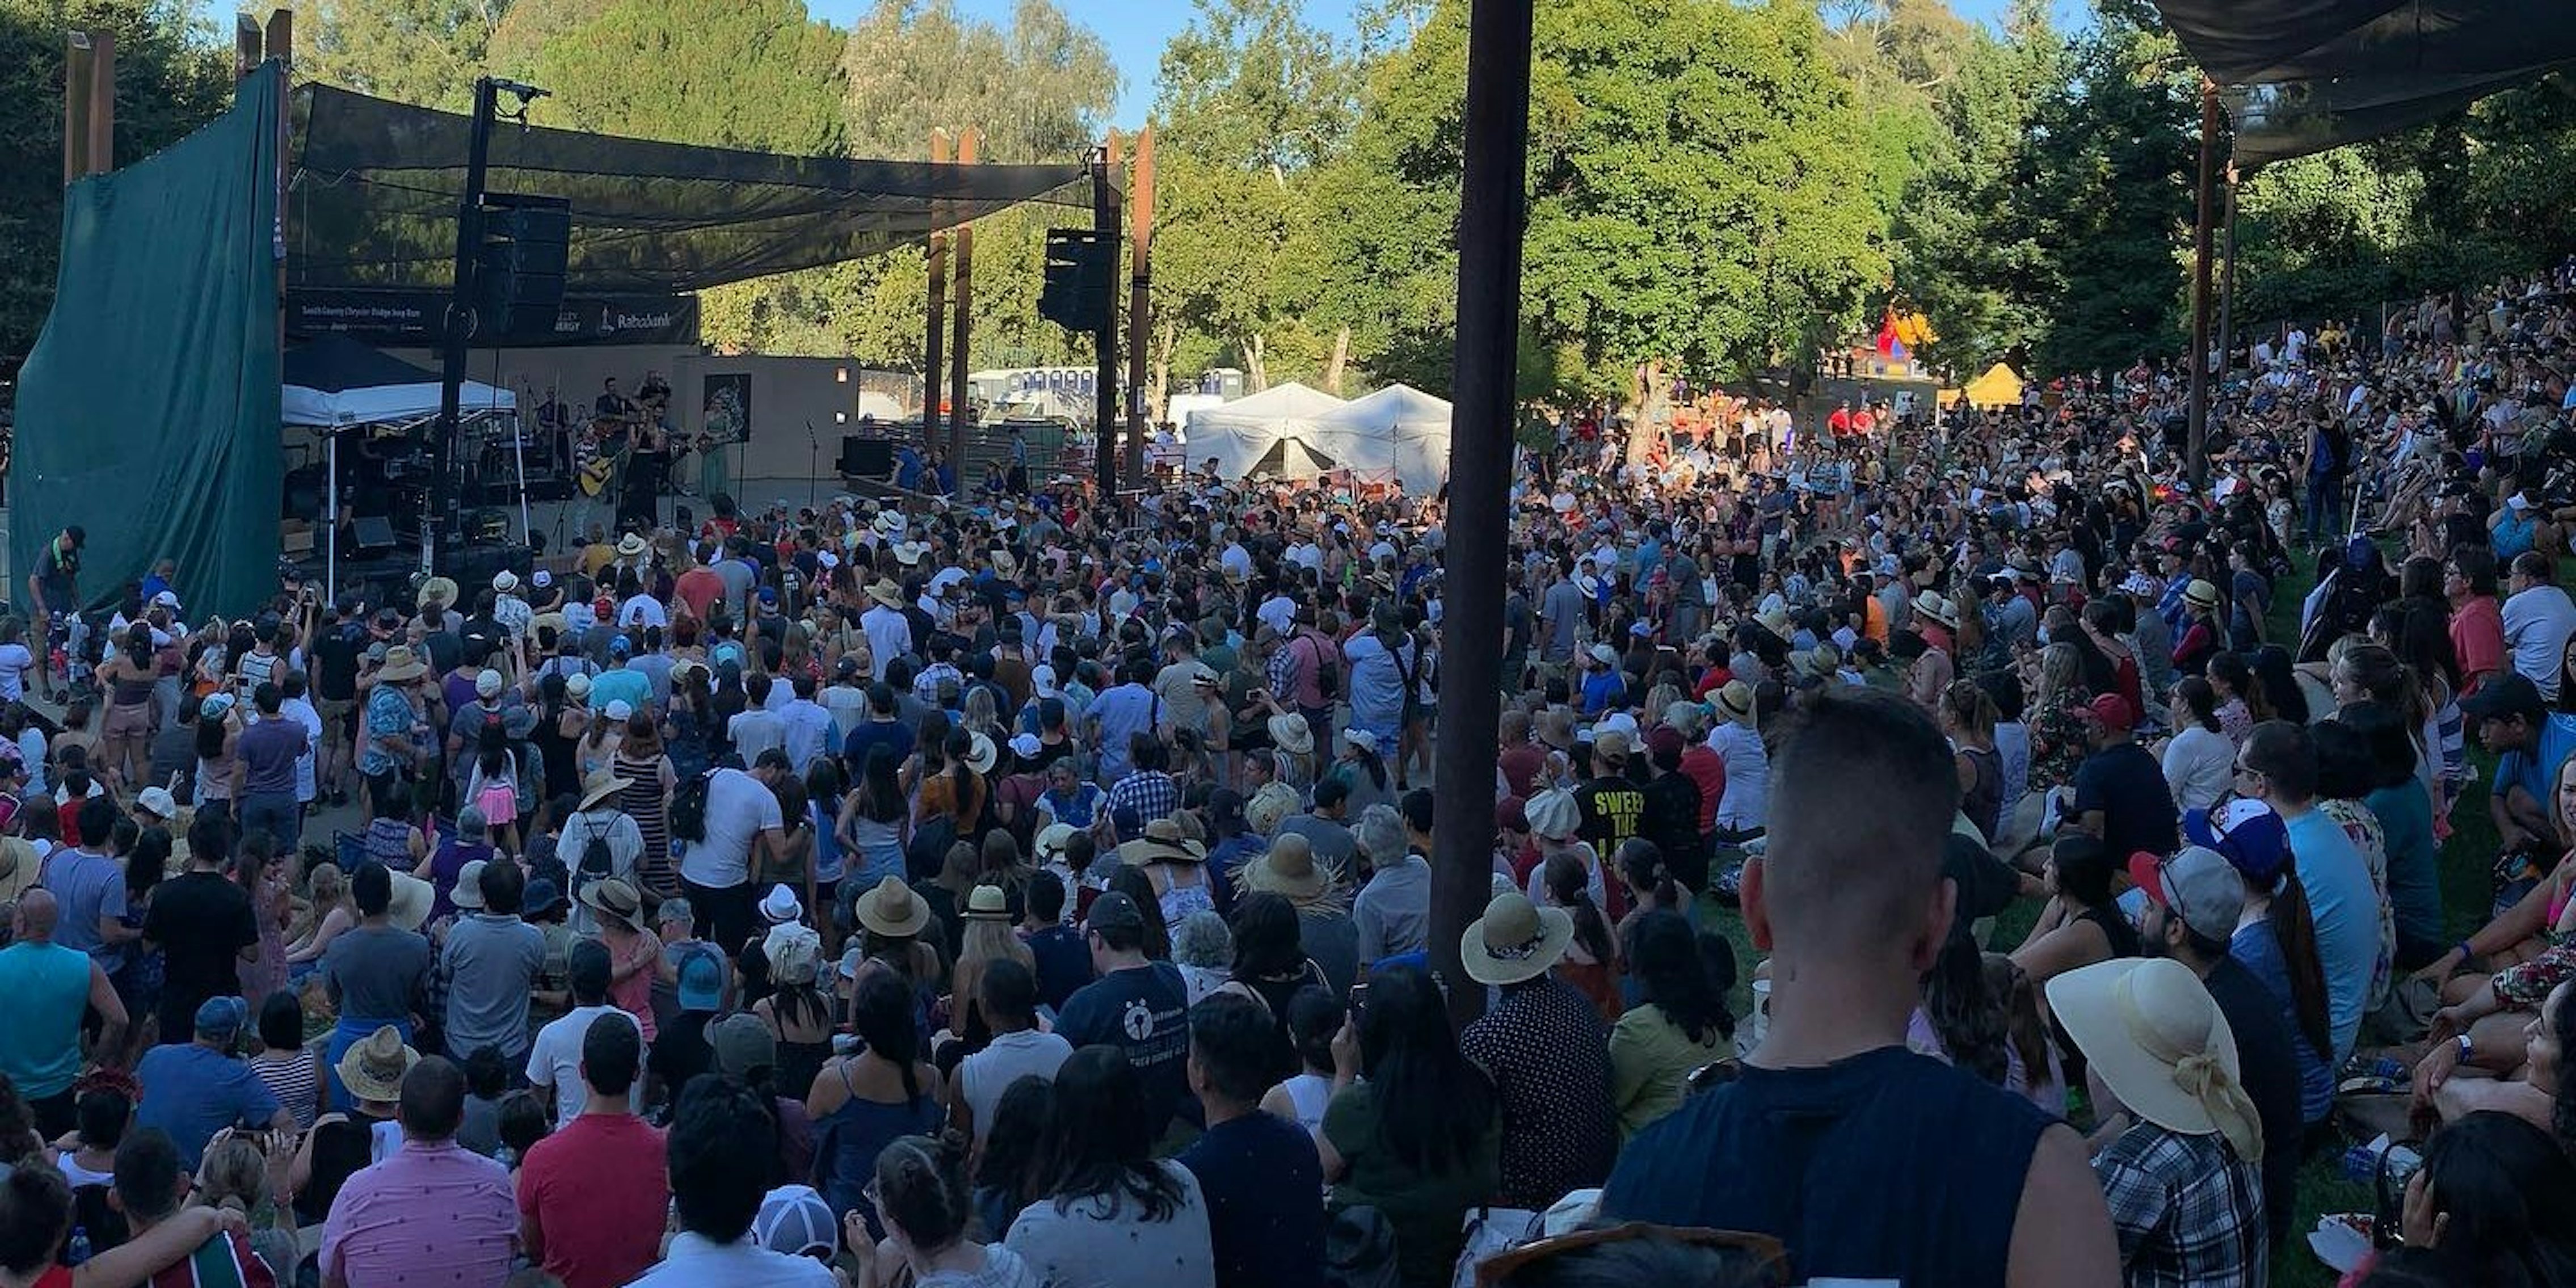 The crowd at Gilroy Garlic Fest on Saturday, day before the shooting